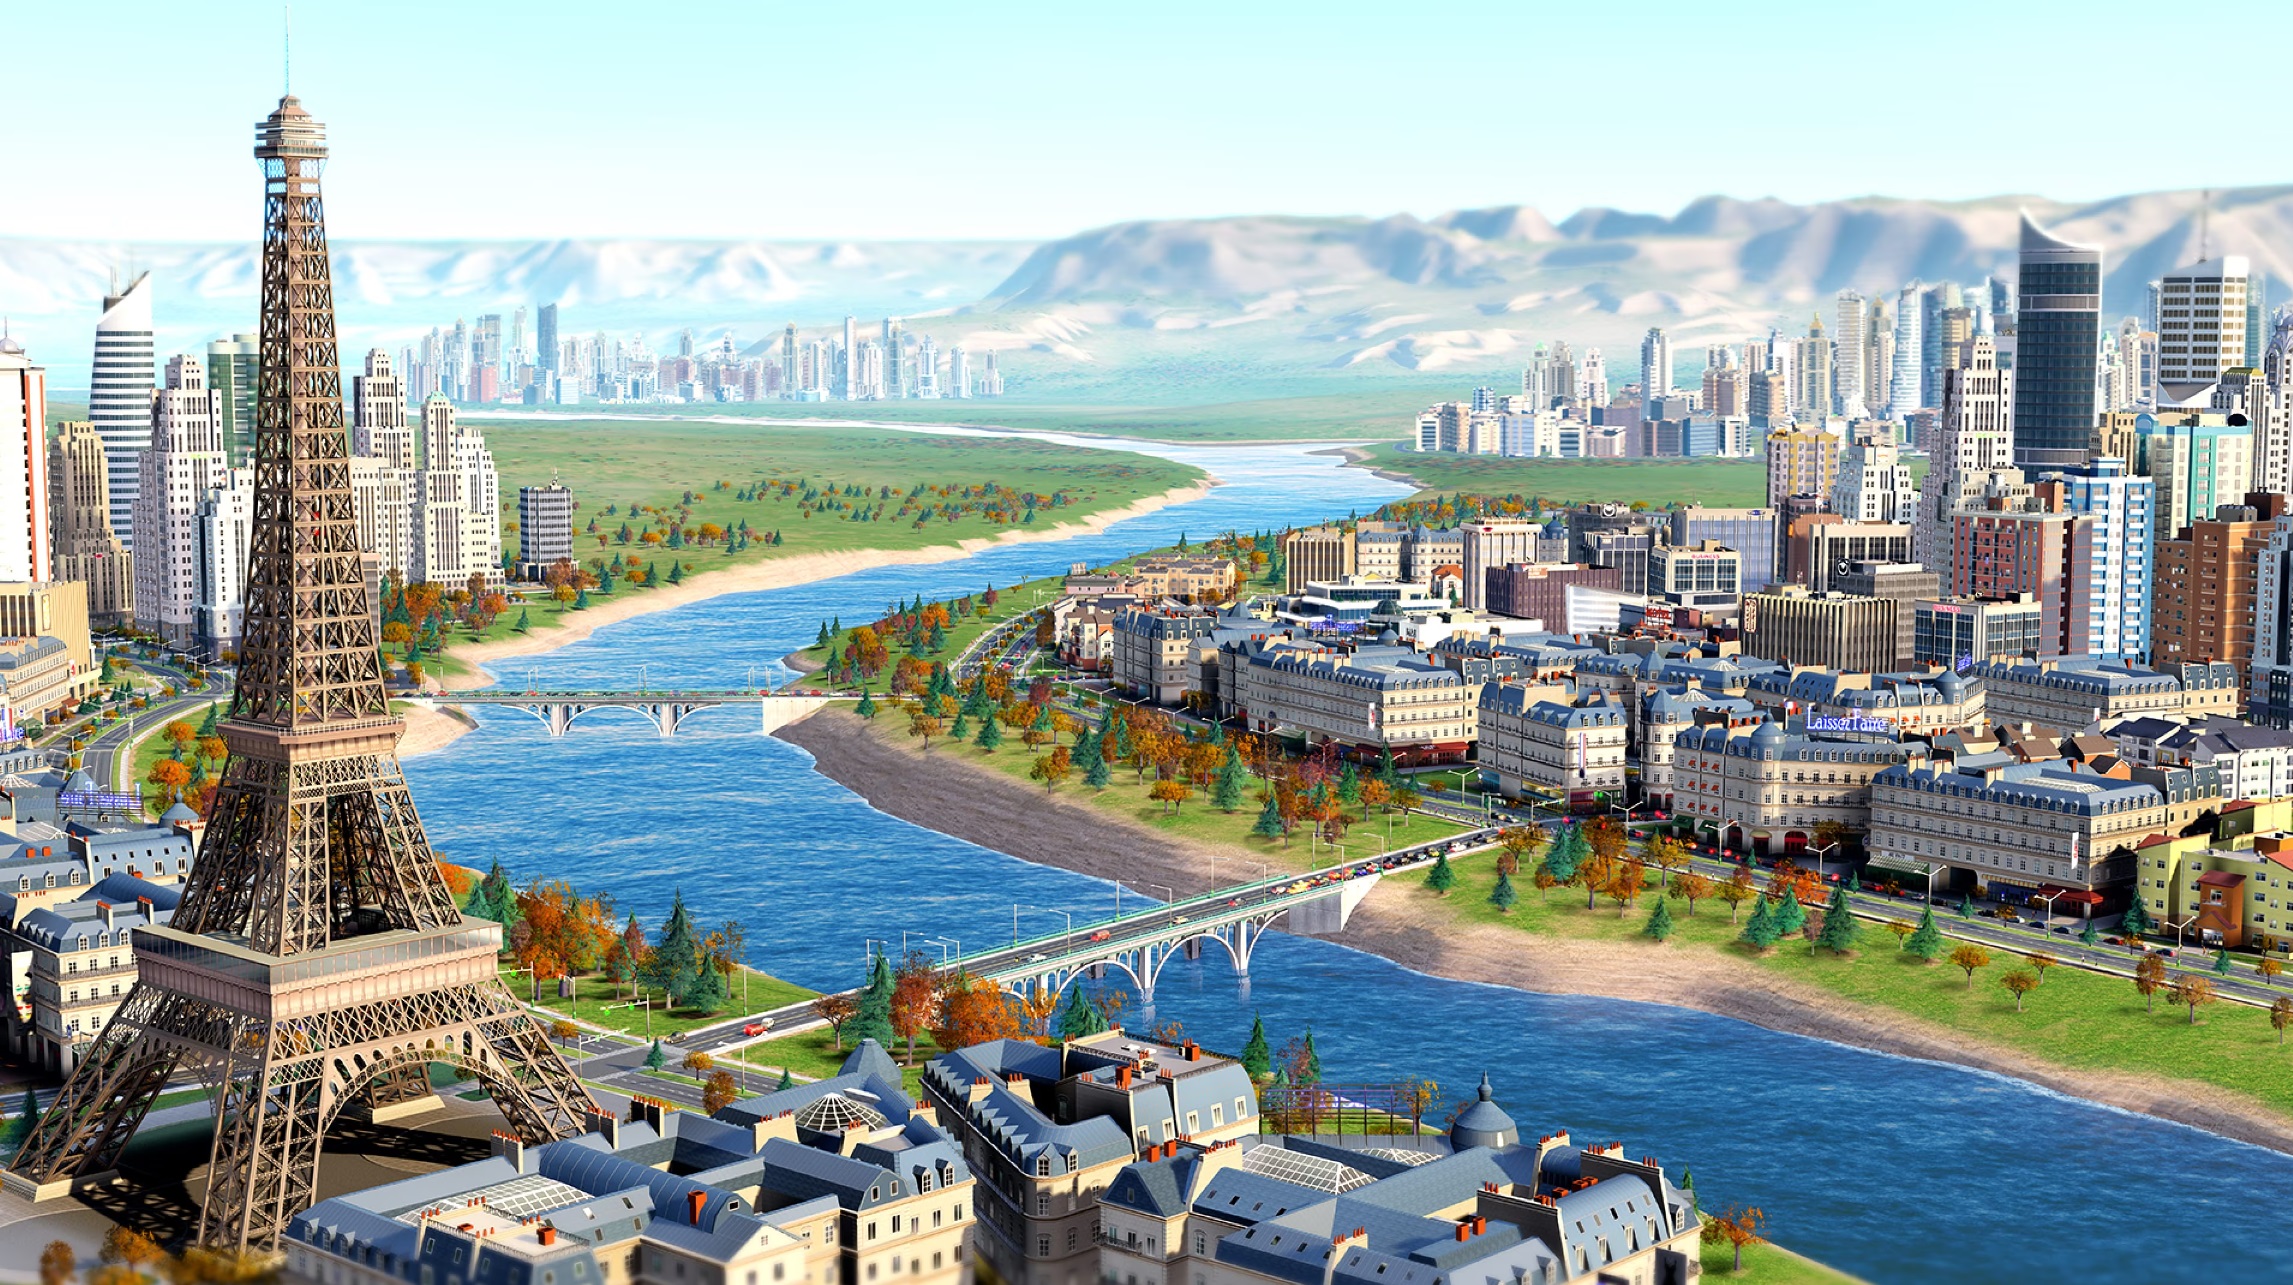 SimCity launched a decade ago, and it was so disastrous it killed the series